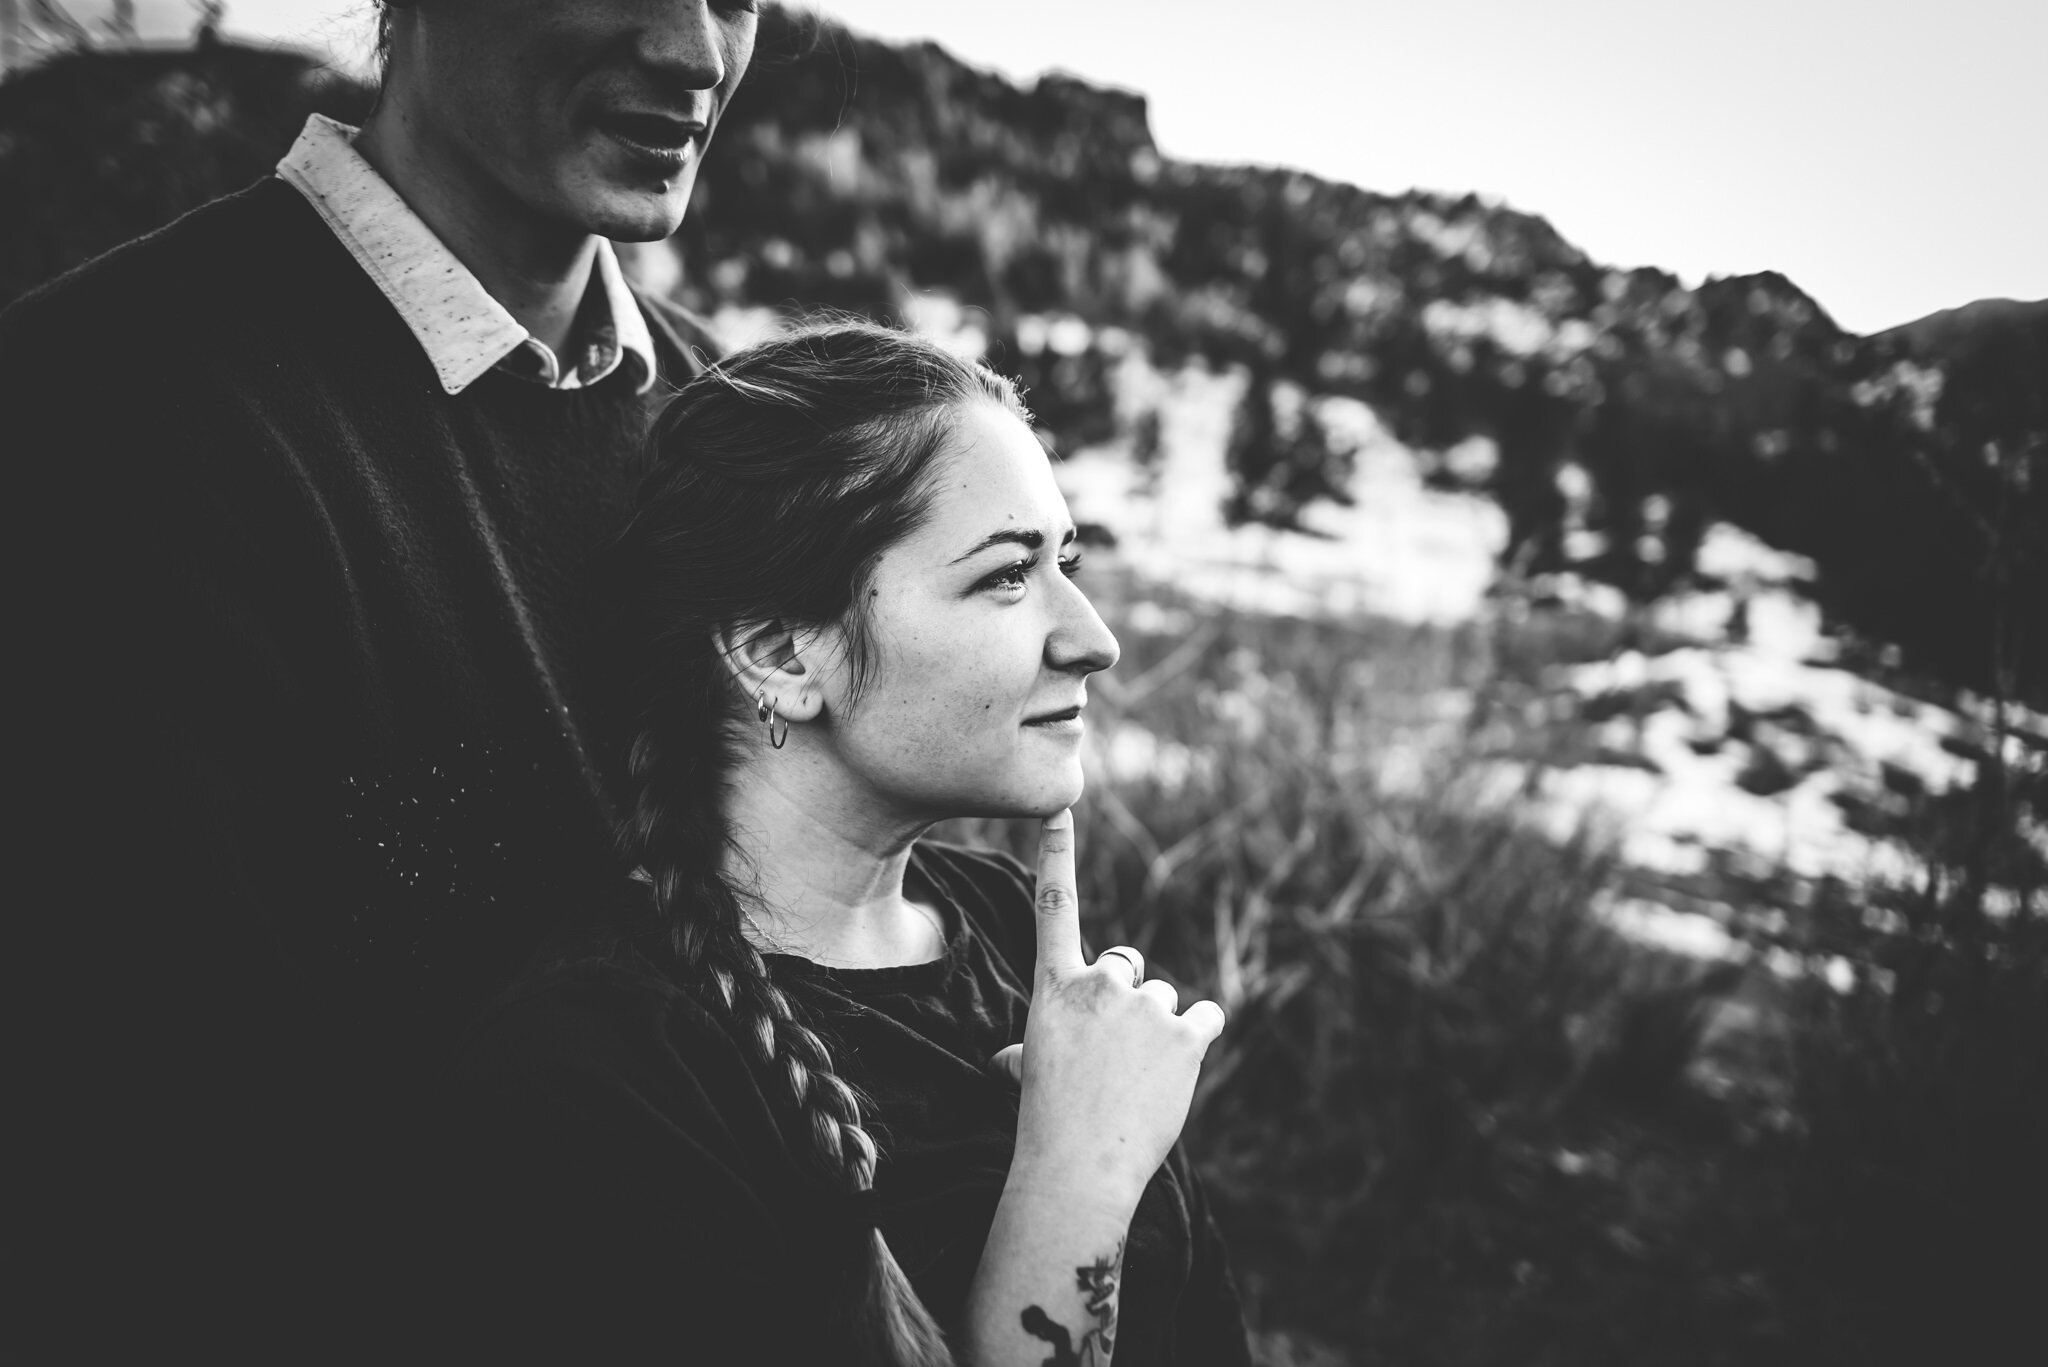 Yulia+and+Logan+Couples+Session+Colorado+Springs+Colorado+Sunset+Cheyenne+Canyon+Husband+Wife+Wild+Prairie+Photography-08-2020.jpeg